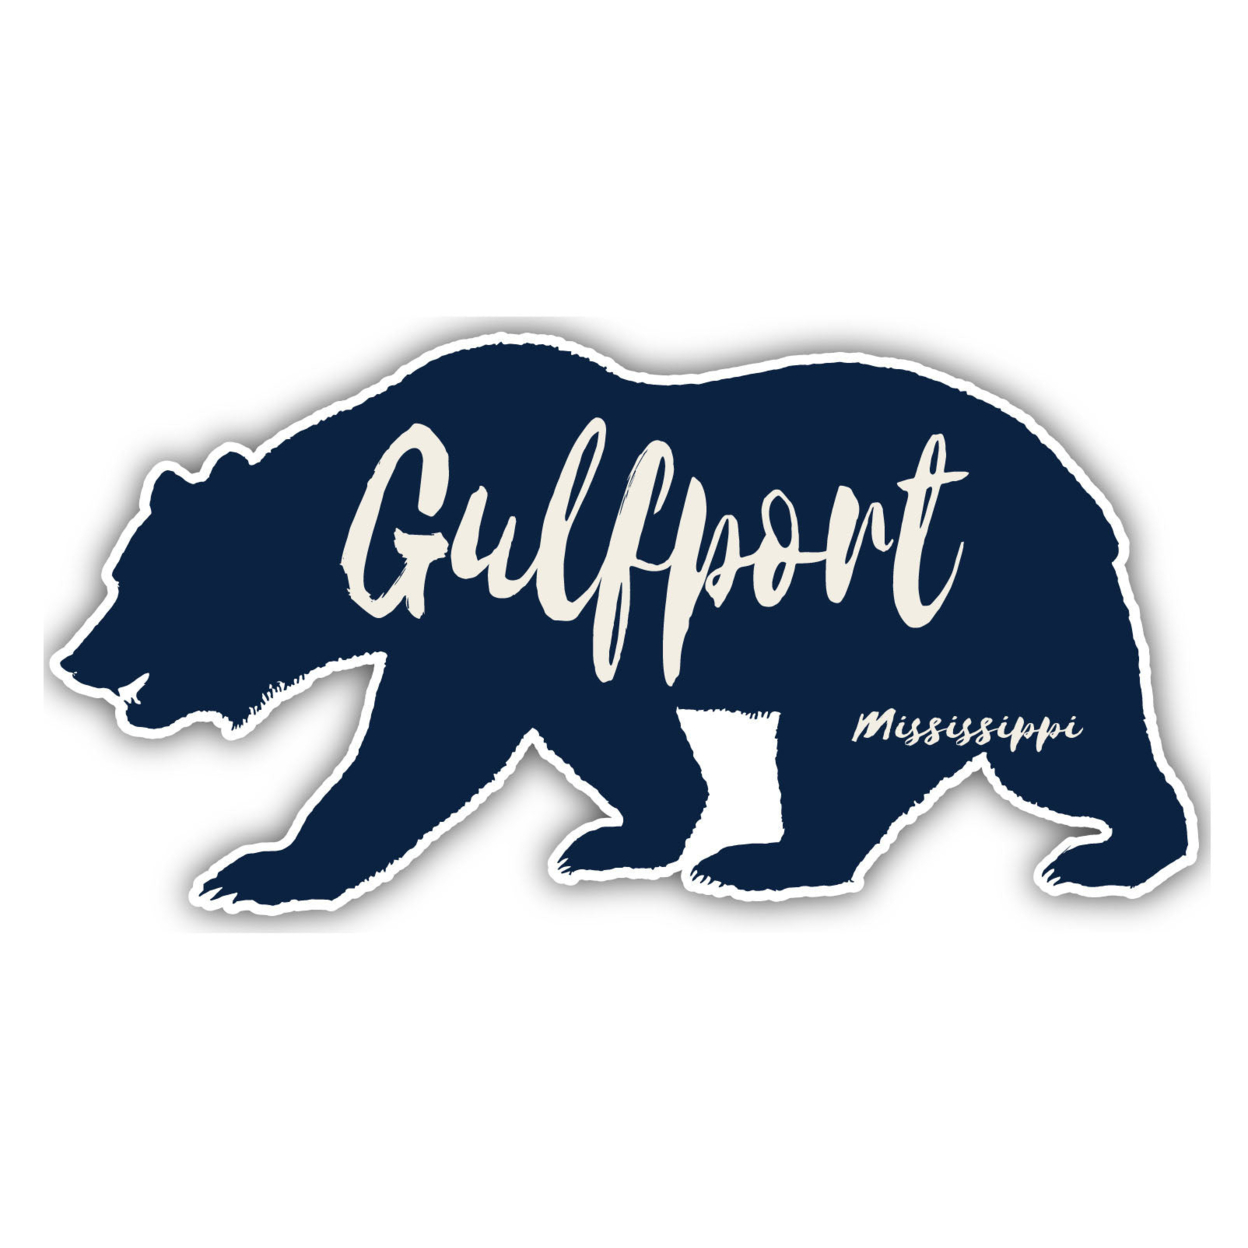 Gulfport Mississippi Souvenir Decorative Stickers (Choose Theme And Size) - Single Unit, 4-Inch, Bear